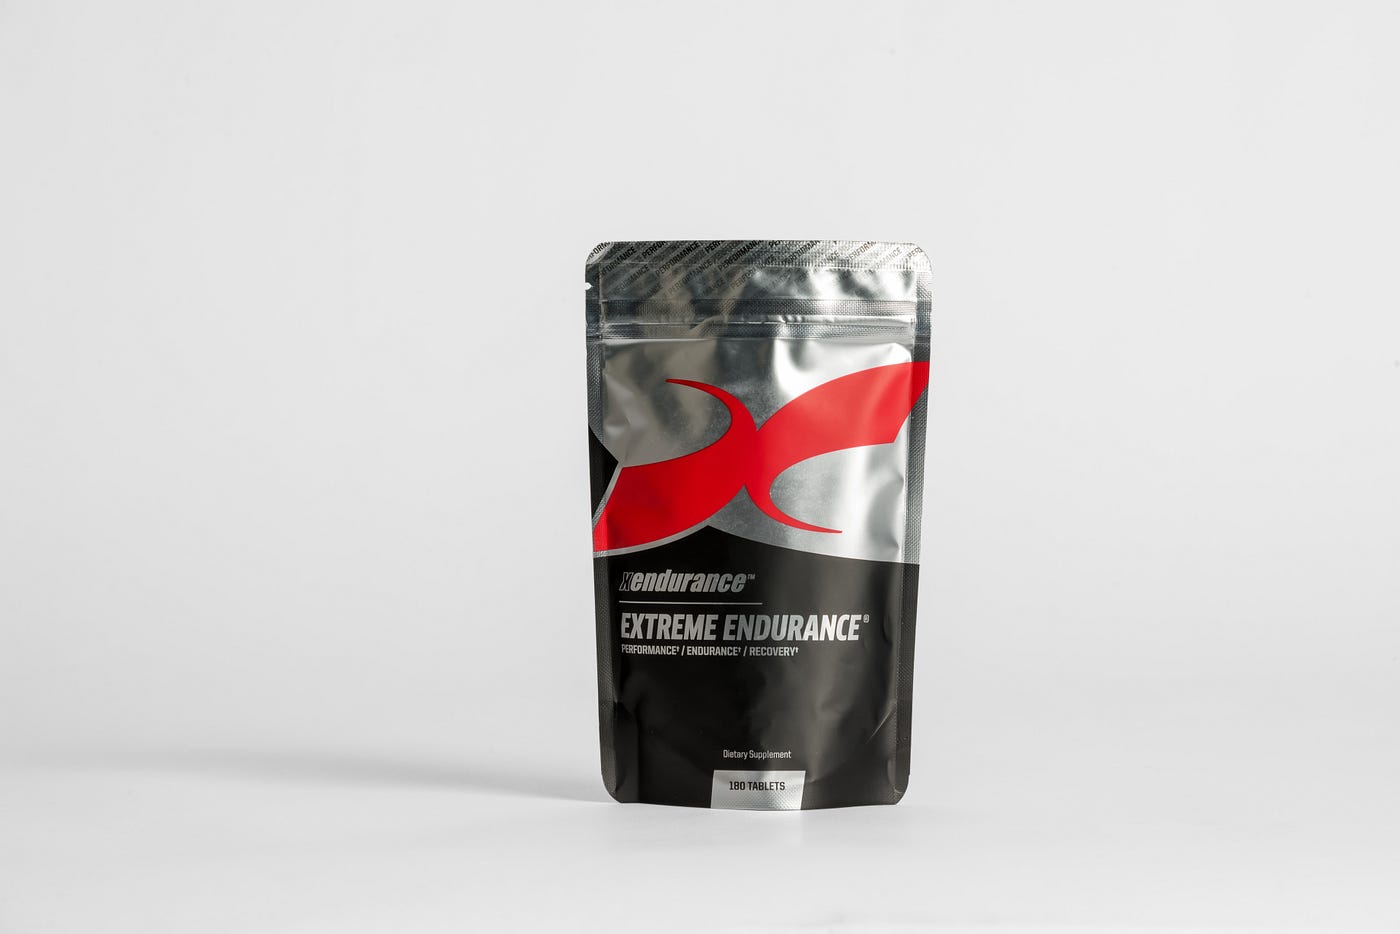 Xendurance Extreme Endurance, also called Essential, REVIEW and OVERVIEW 